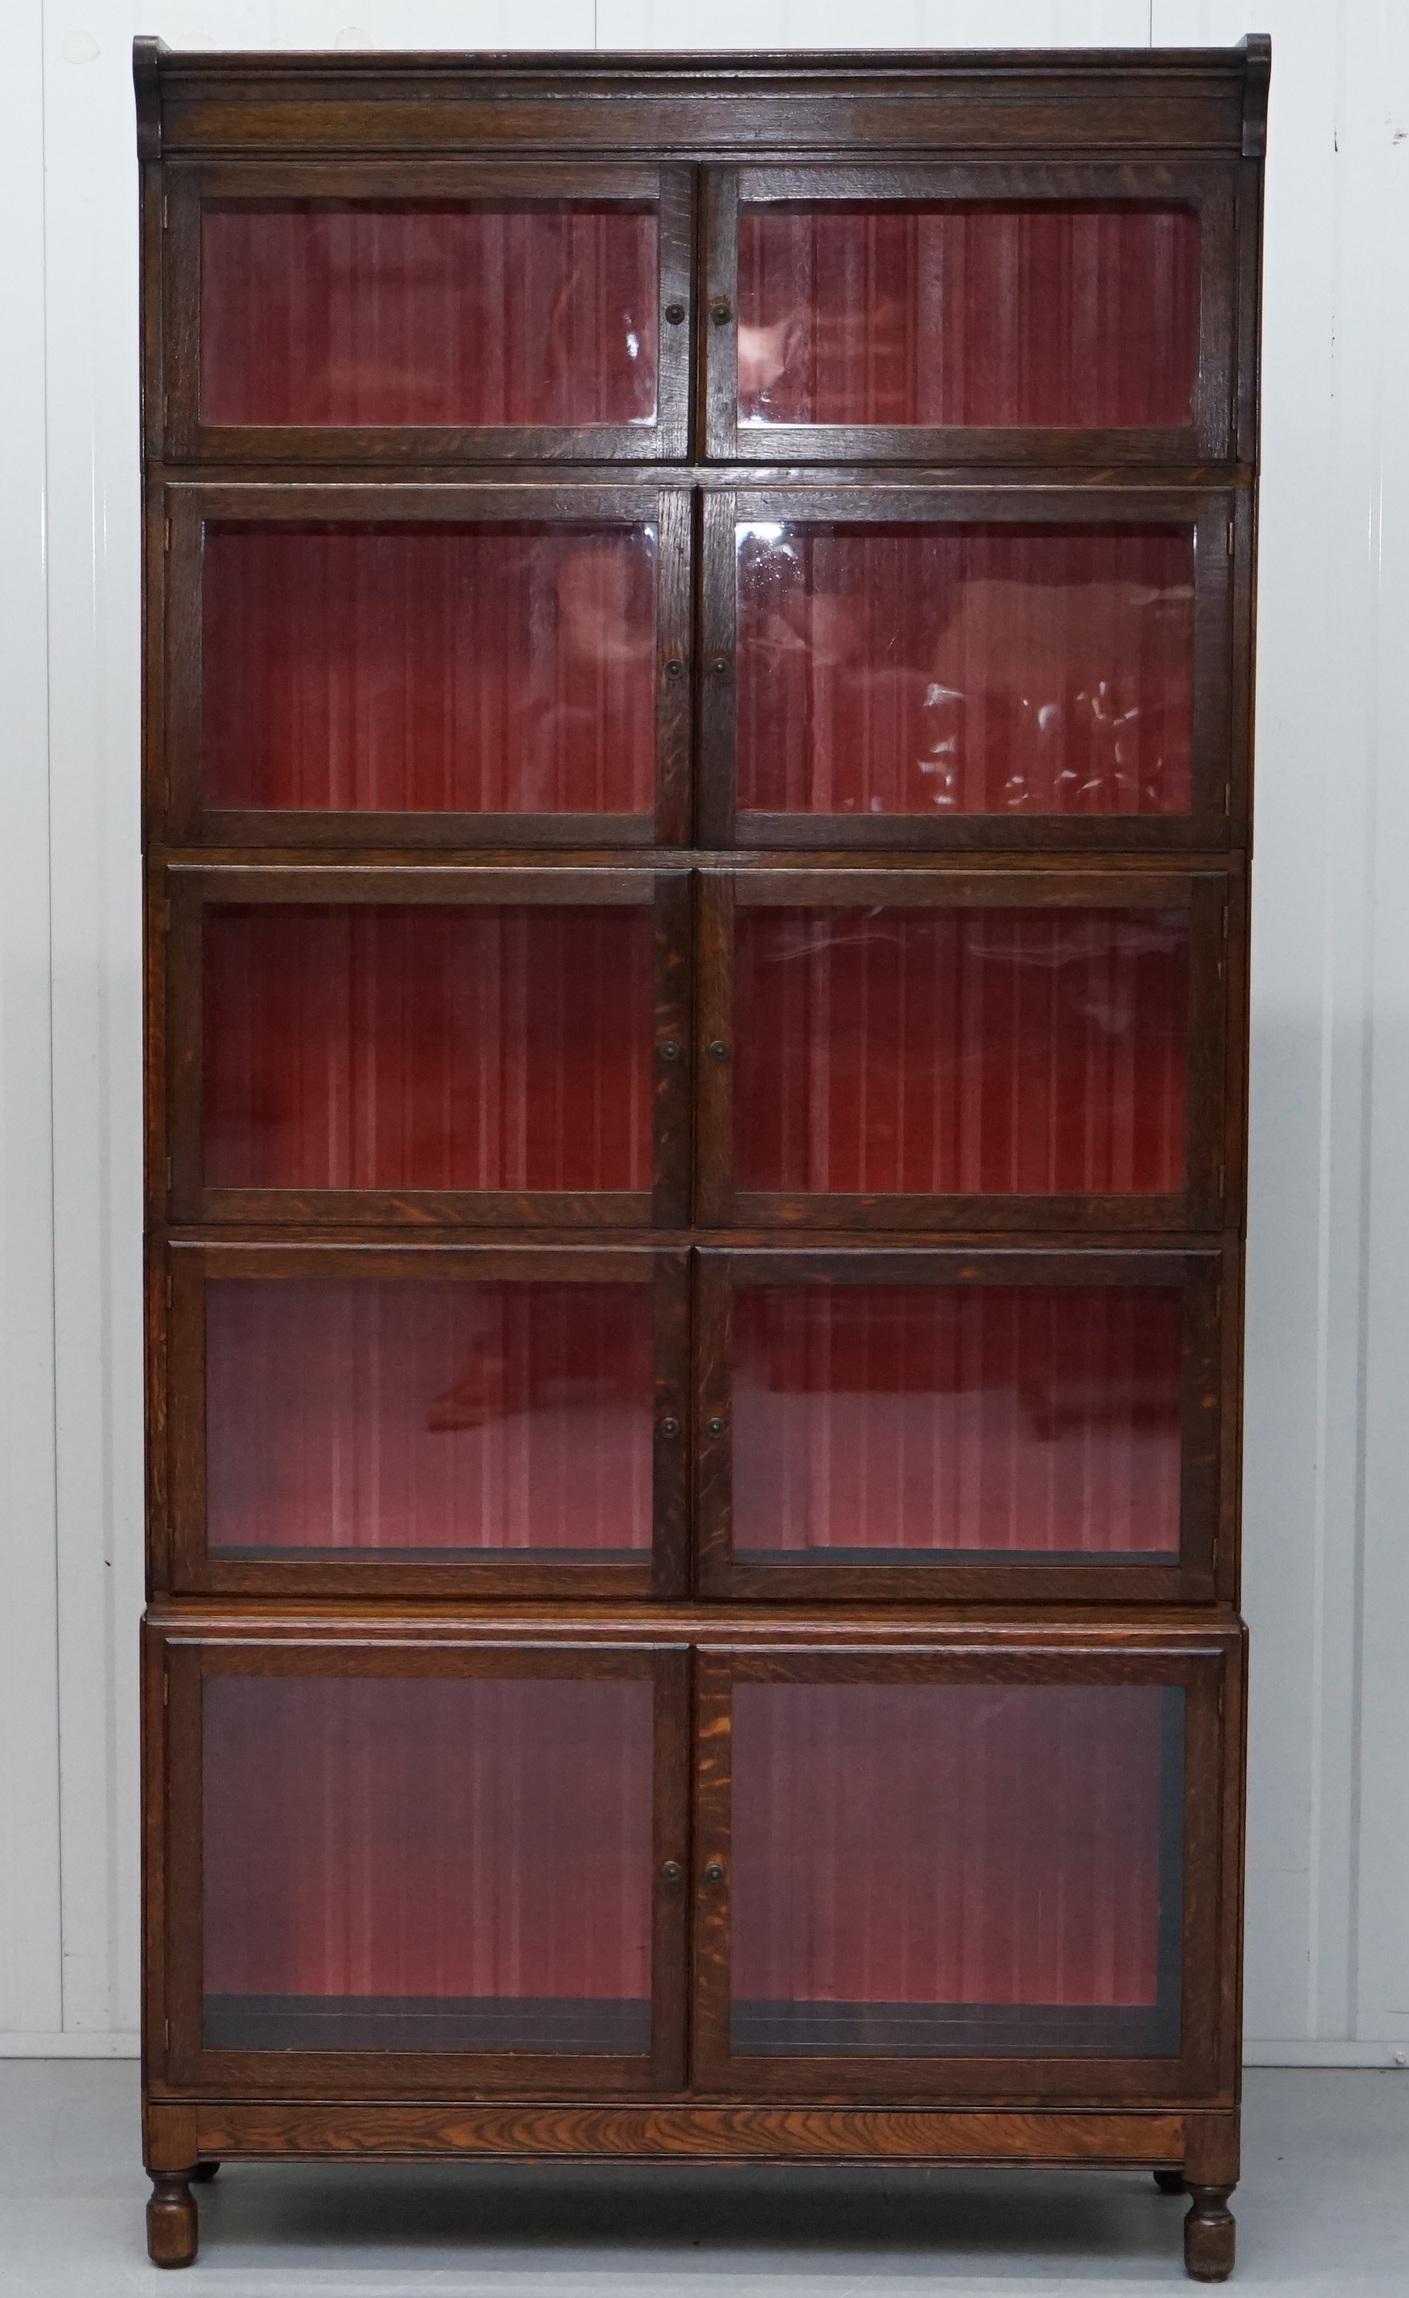 We are delighted to offer for sale this lovely early circa 1920 Minty oxford stacking legal bookcase made from solid English oak

A very good looking and well-made piece, there were a number of companies making this type of bookcase in the late